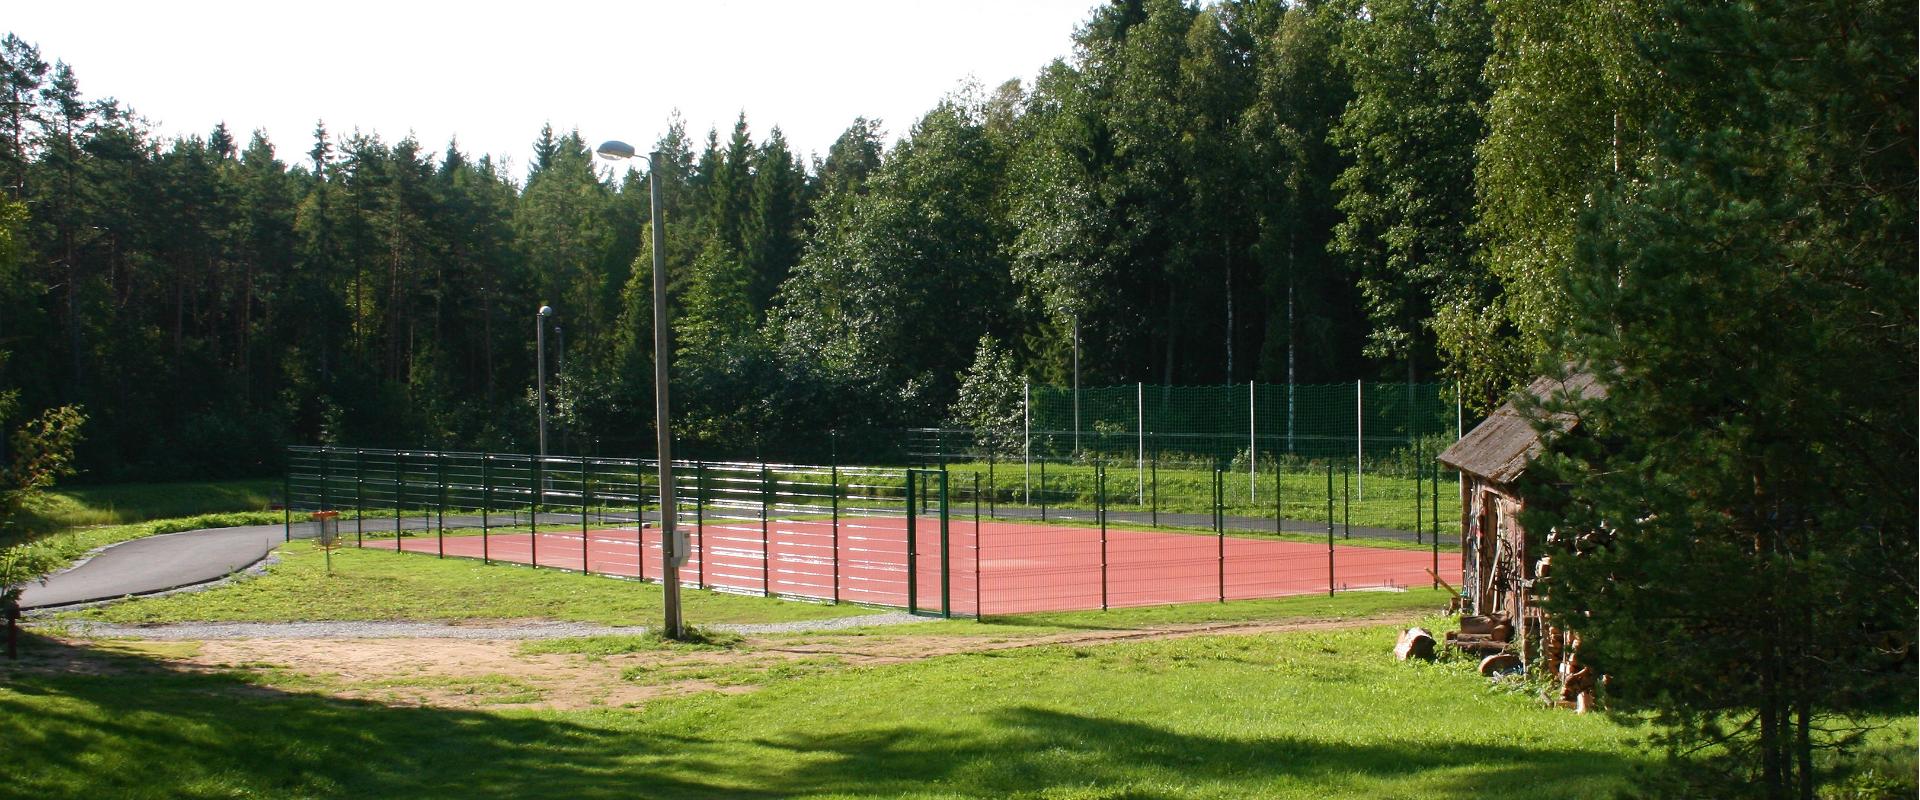 Tennis and basketball courts at Valgehobusemäe Ski and Recreation Centre